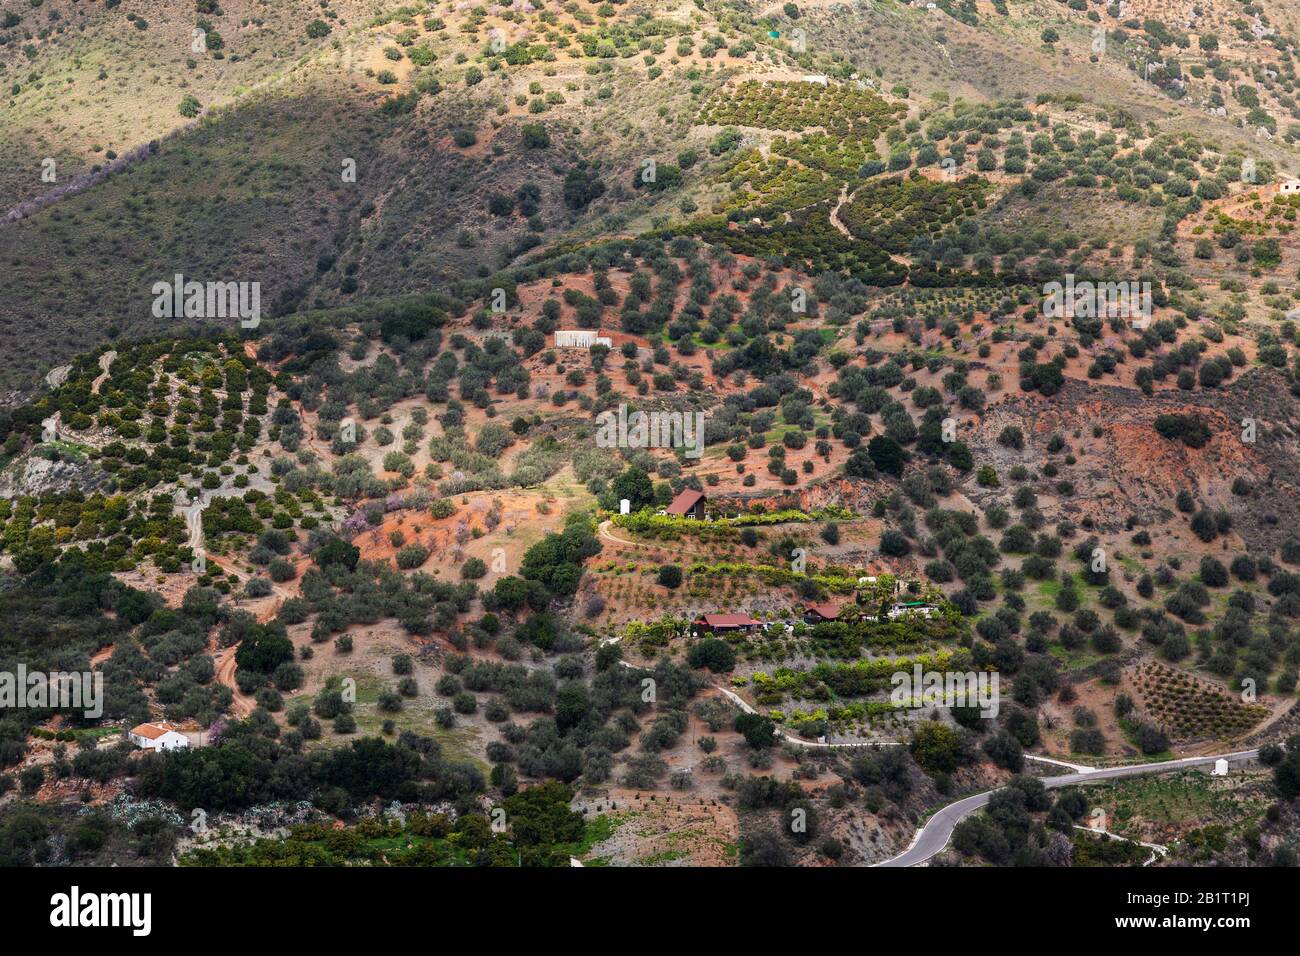 Beautiful rugged landscape of Andalusia, Spain Stock Photo